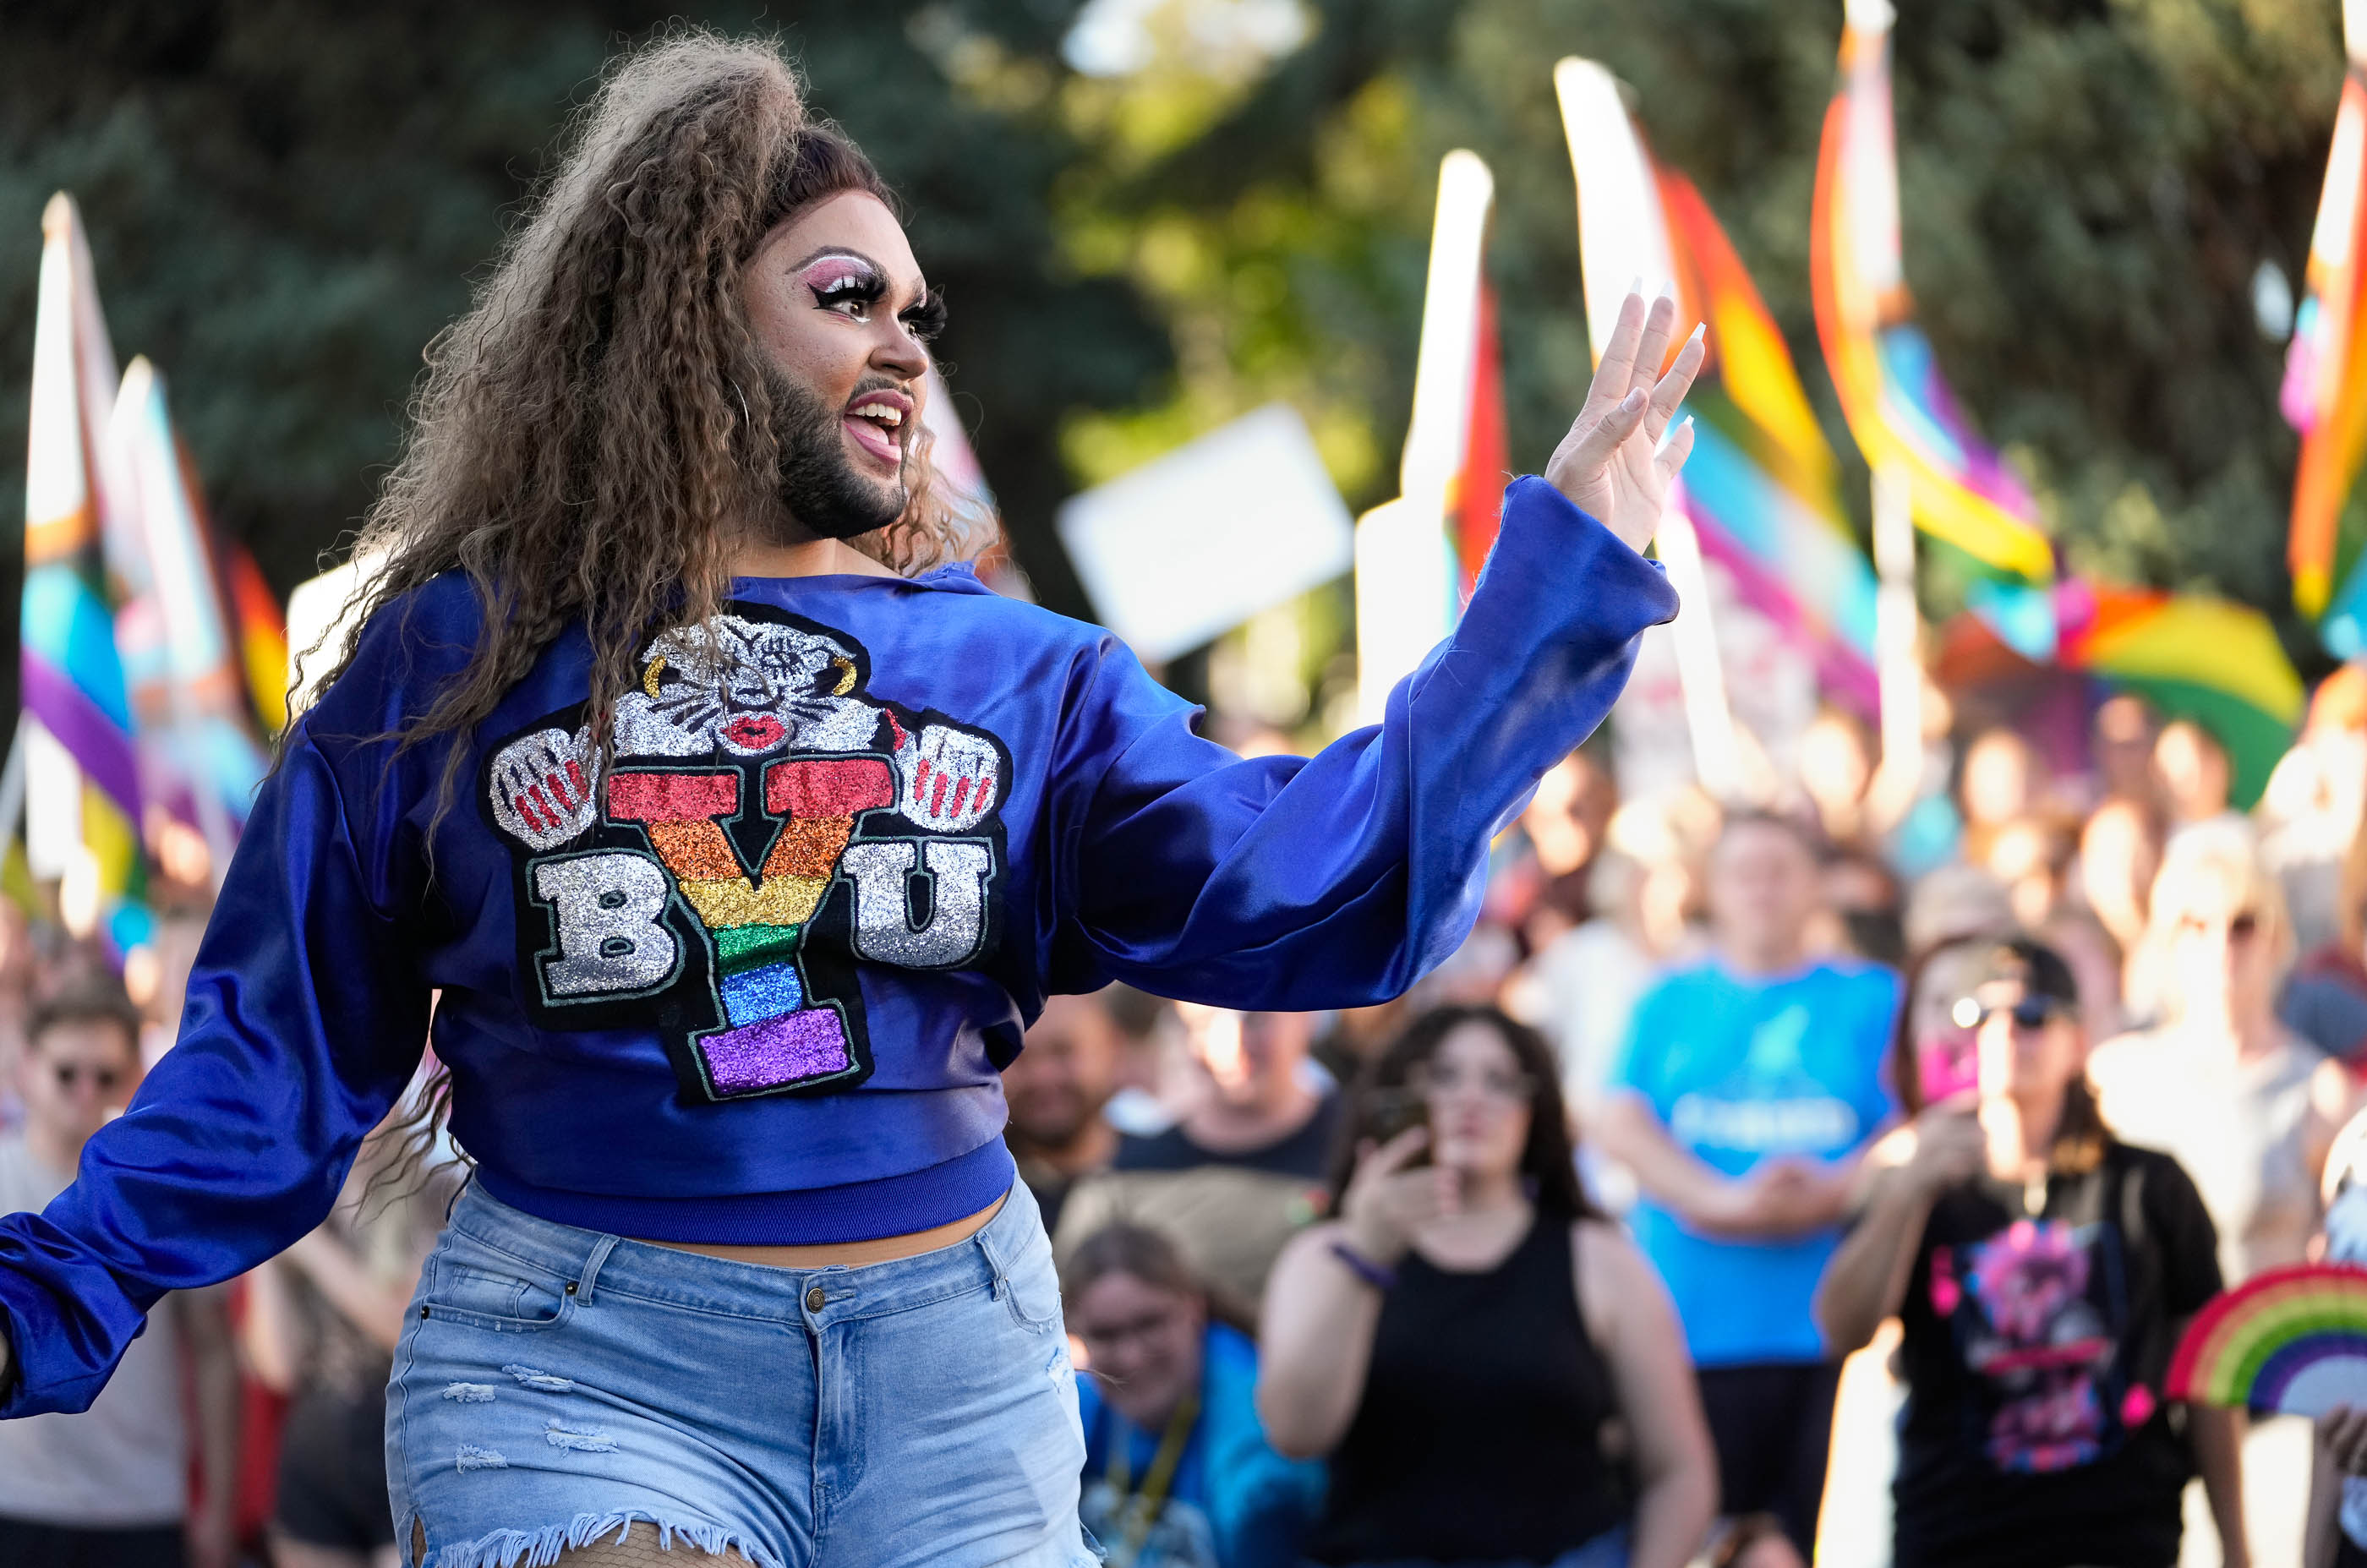 Dodgers Side With Religious Right, Kick Drag Group Out of Pride Night